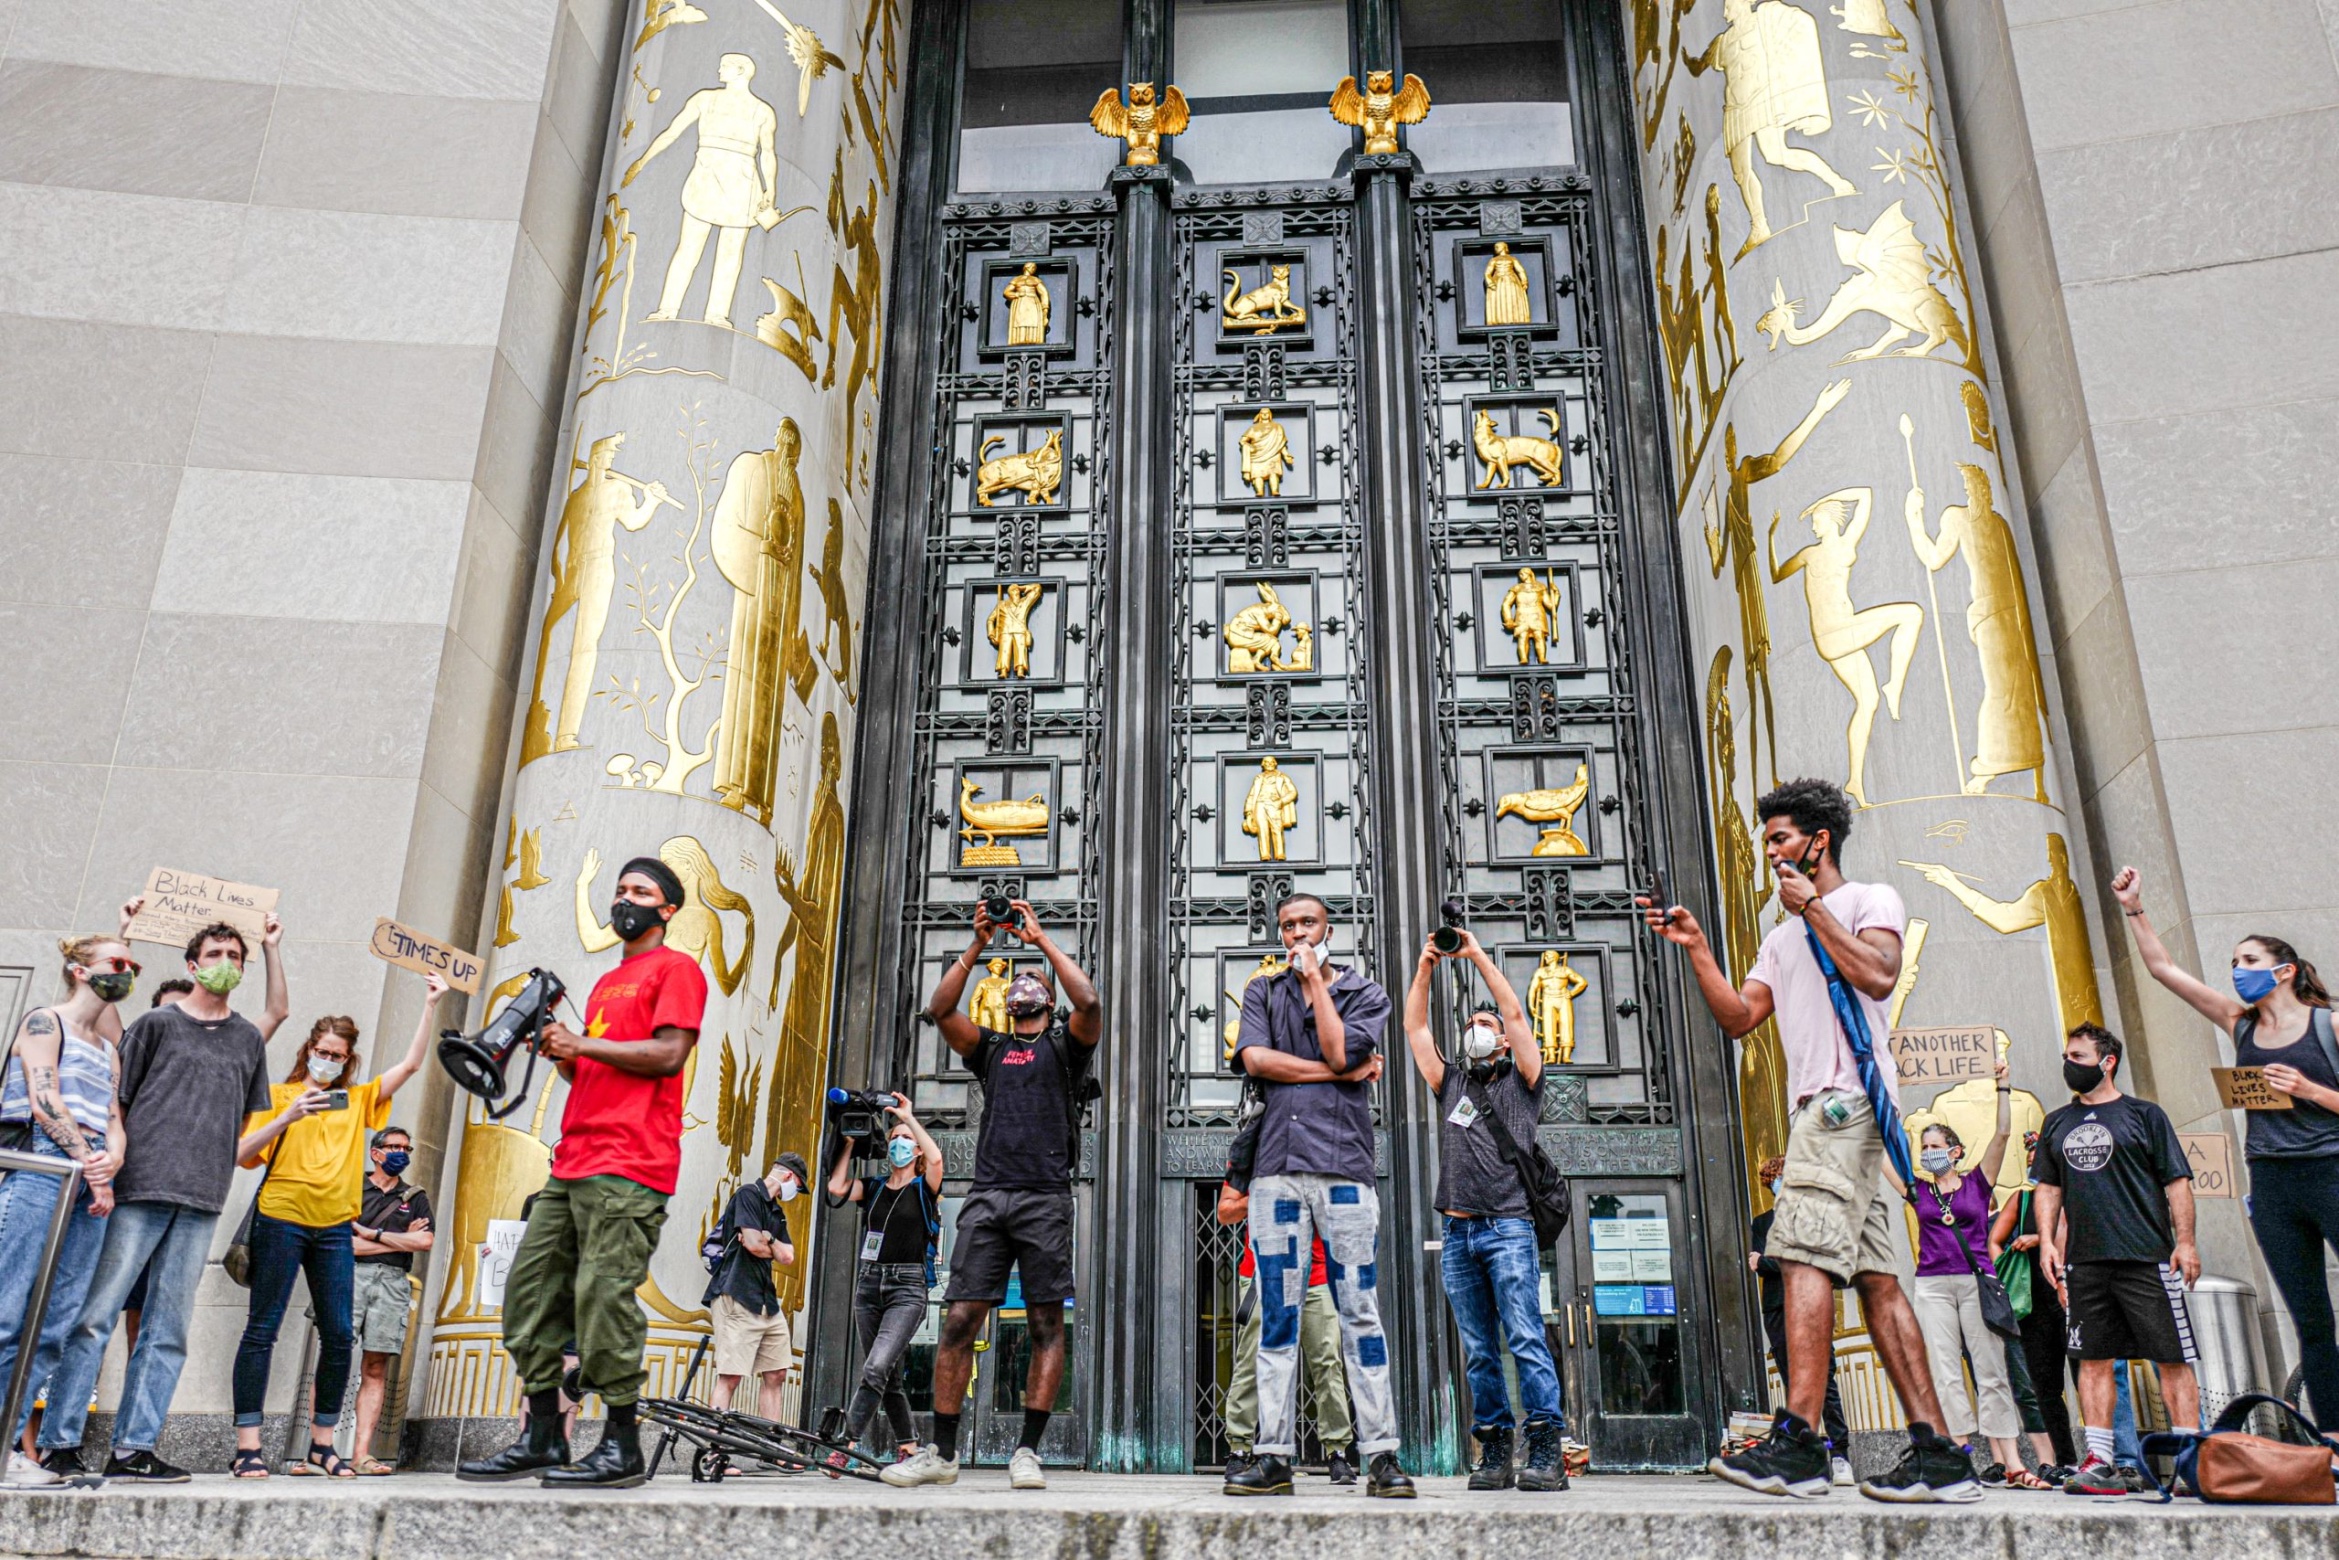 A Black Lives Matter protest by members of the group Warriors in the Garden at the entrance to the Brooklyn Public Library in the summer of 2020 (photo by and courtesy Francesca Magnani)